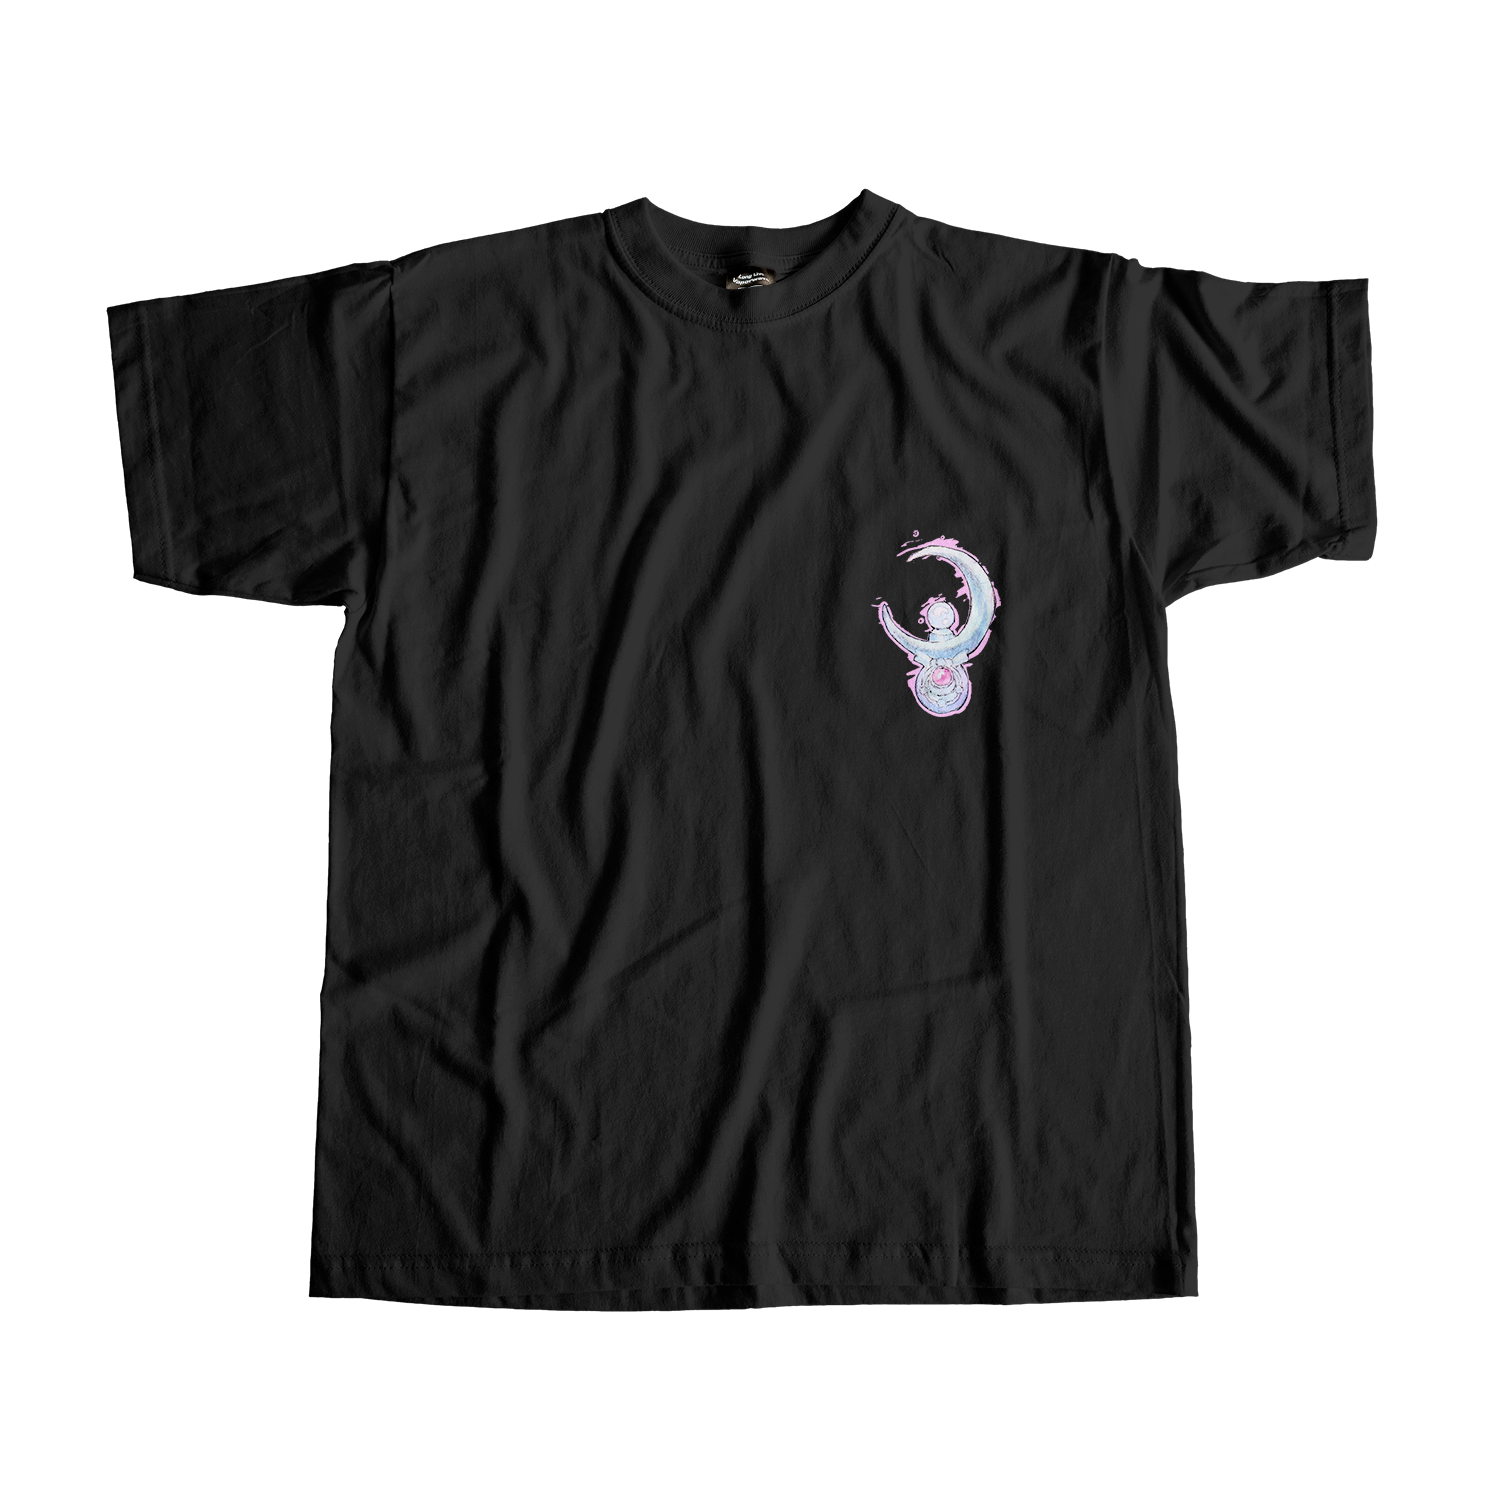 The Reckoning Tee